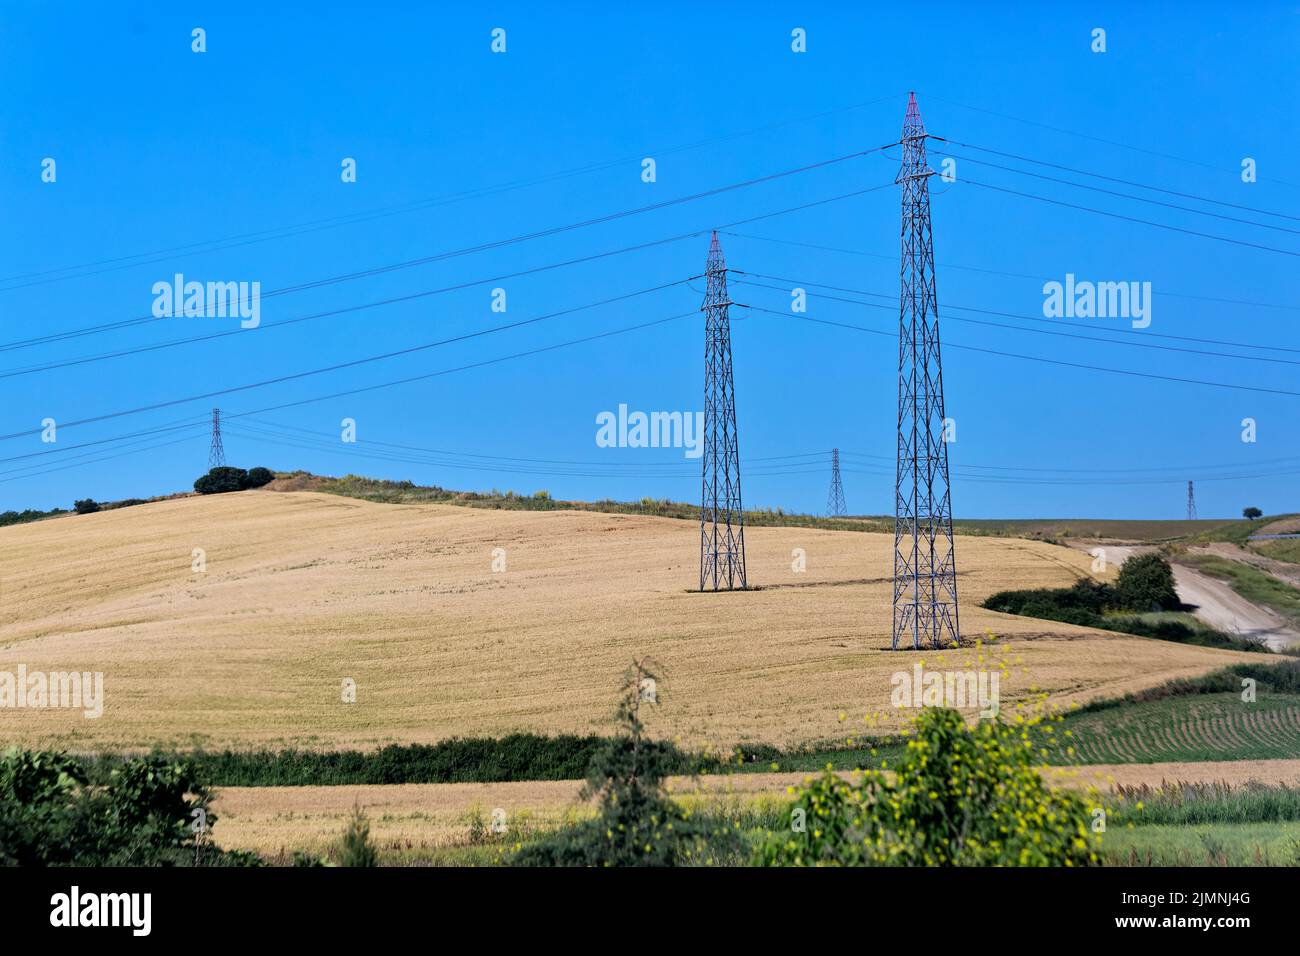 Power lines and pylon electricity pols along with crop fields in the rural area. Tekirdag, Turkey. Stock Photo